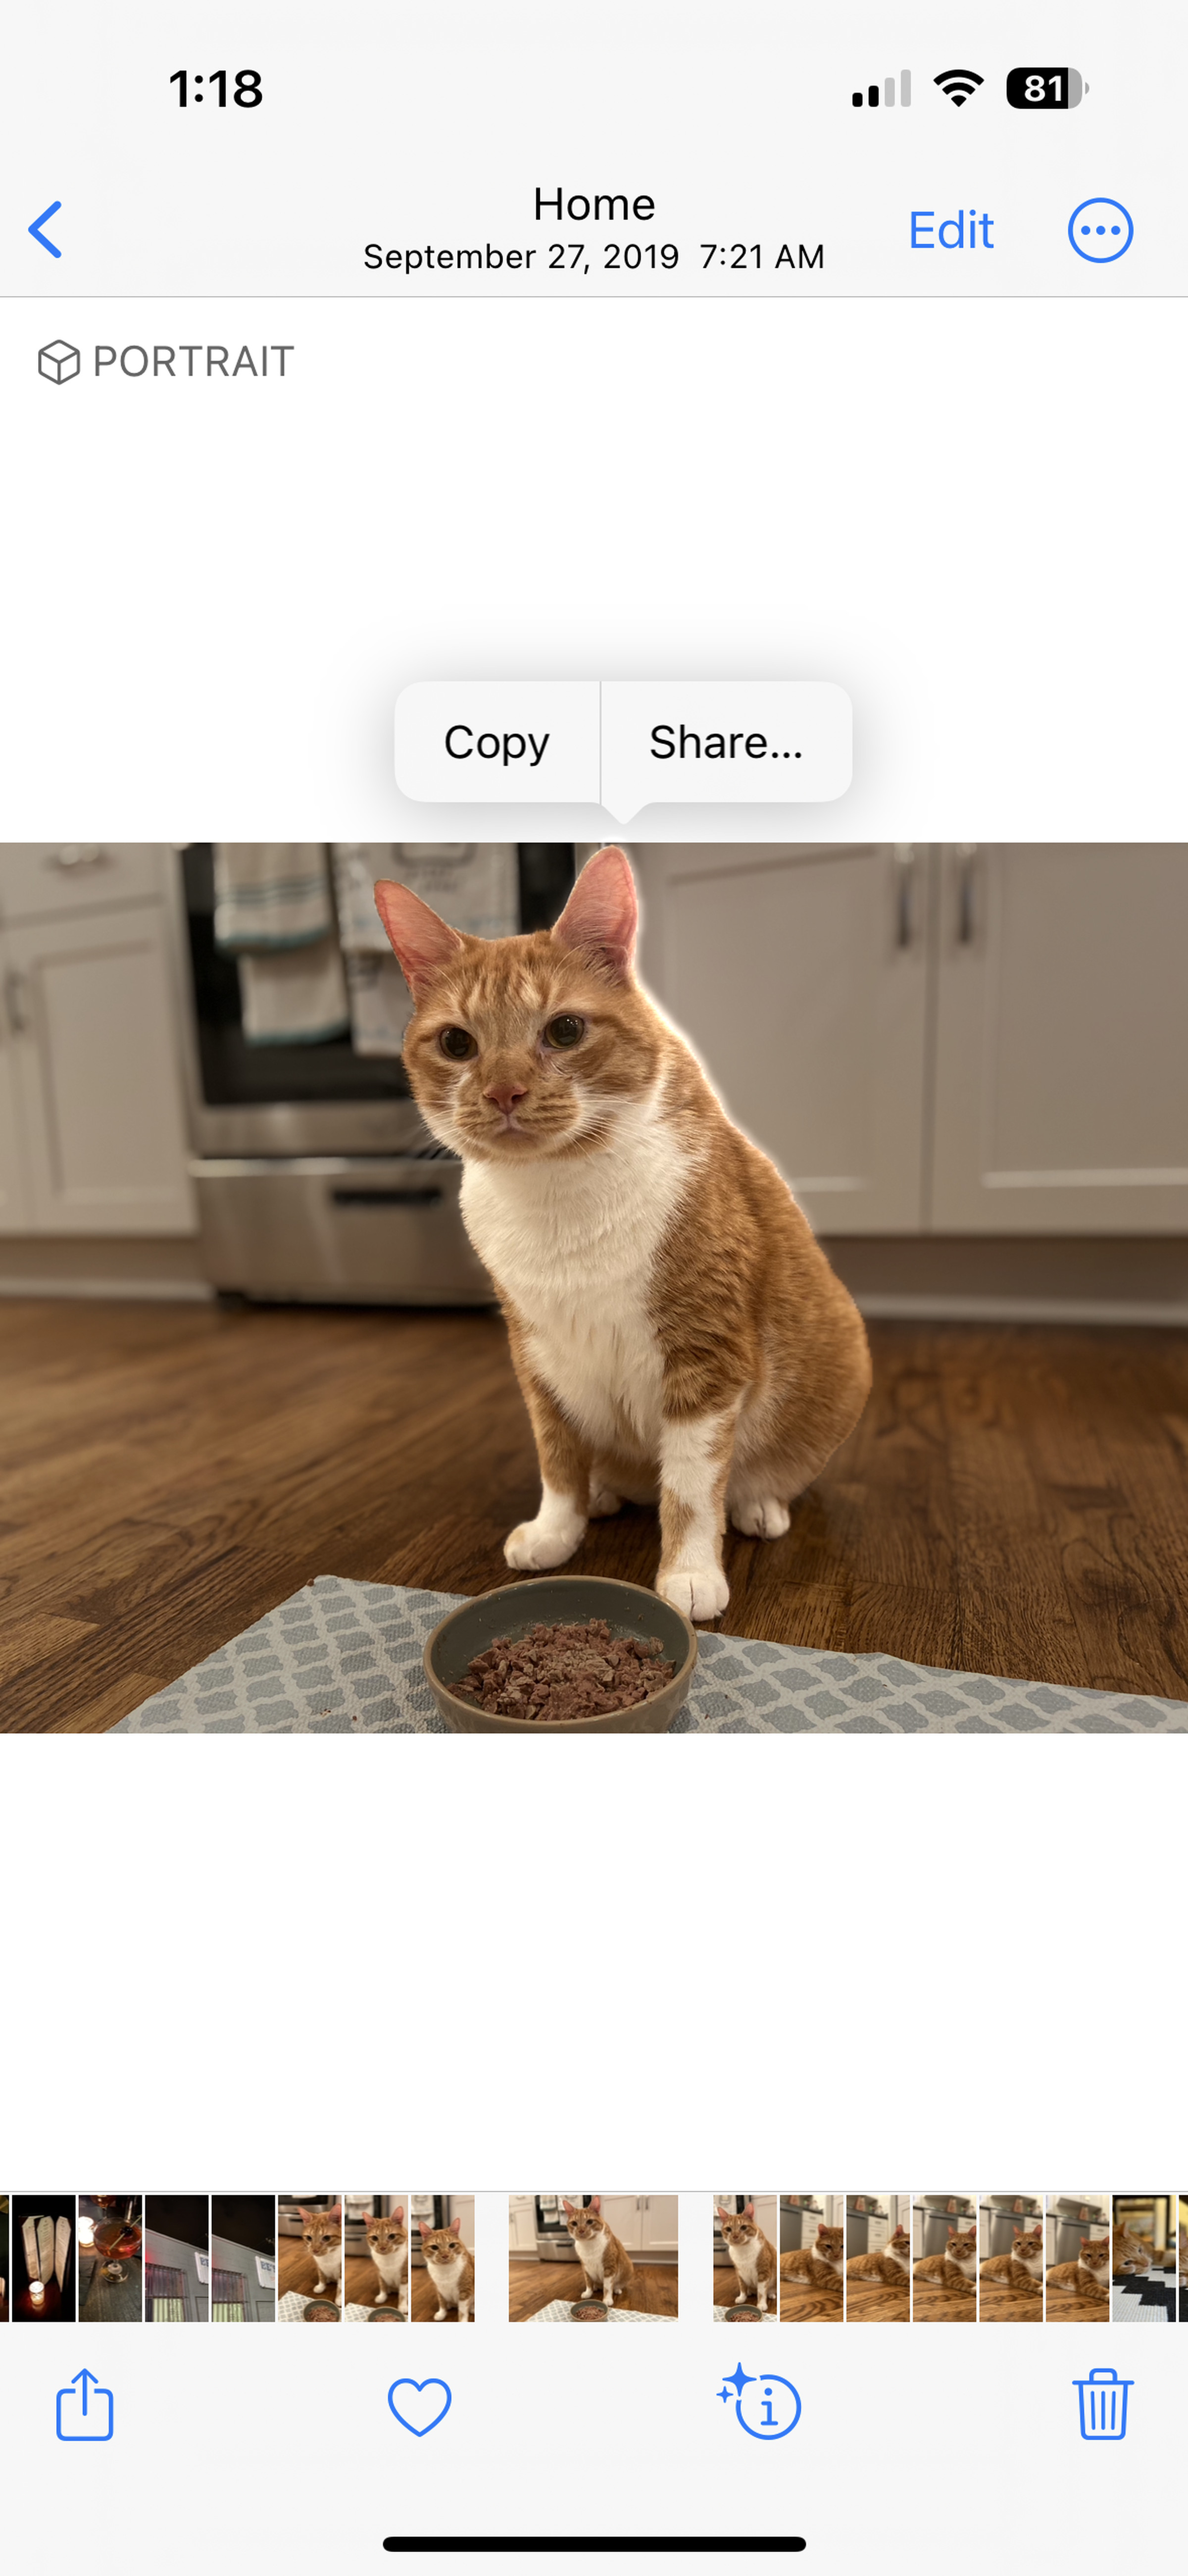 A photo of a cat with the subject highlighted and cut out from the background.